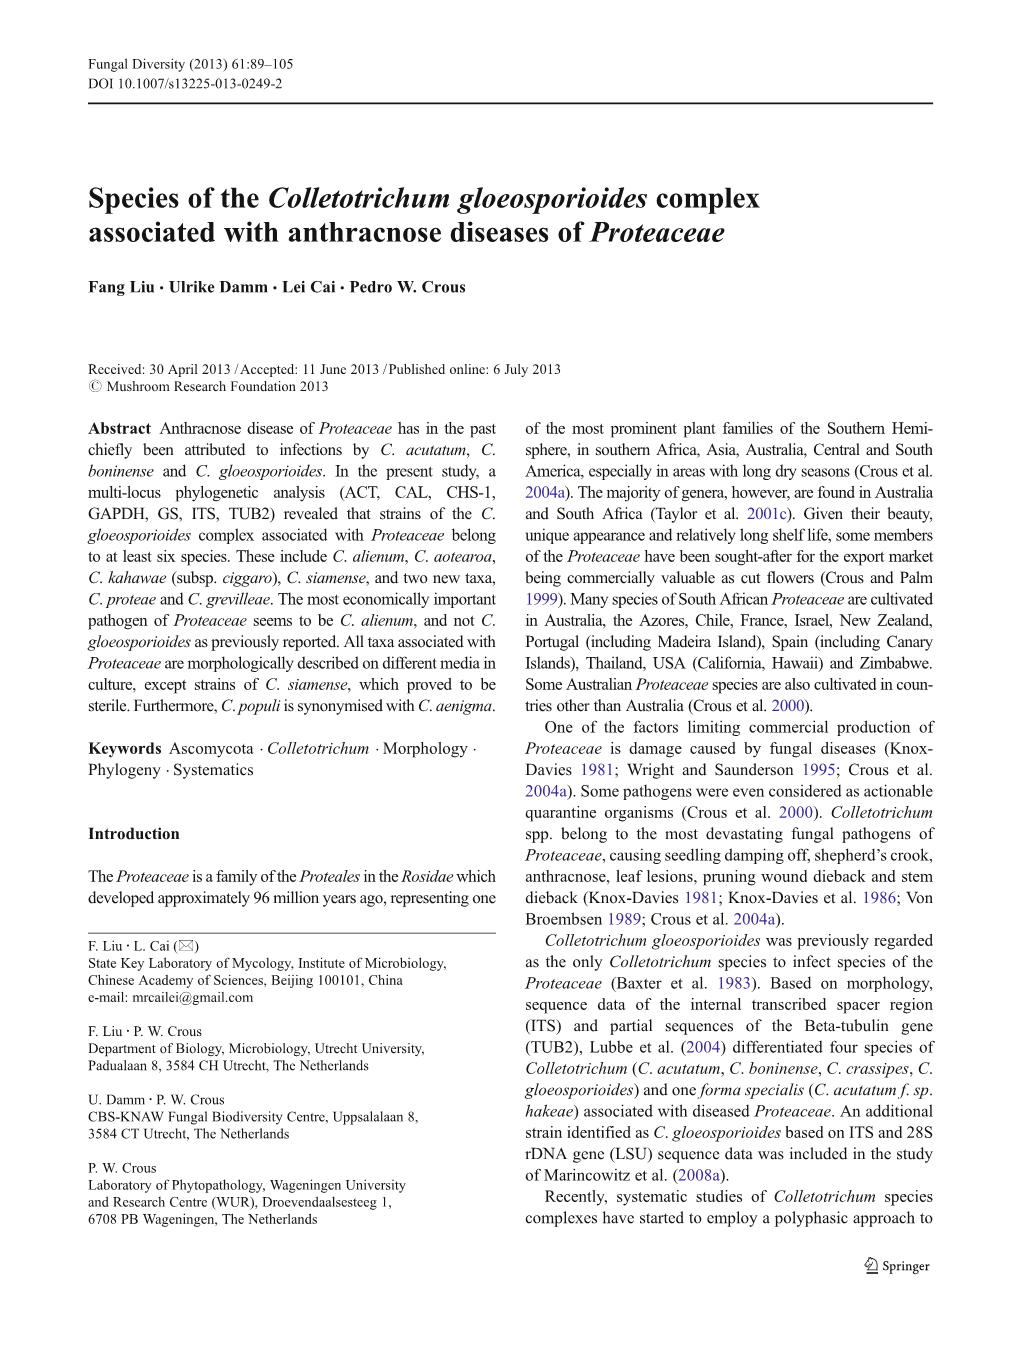 Species of the Colletotrichum Gloeosporioides Complex Associated with Anthracnose Diseases of Proteaceae